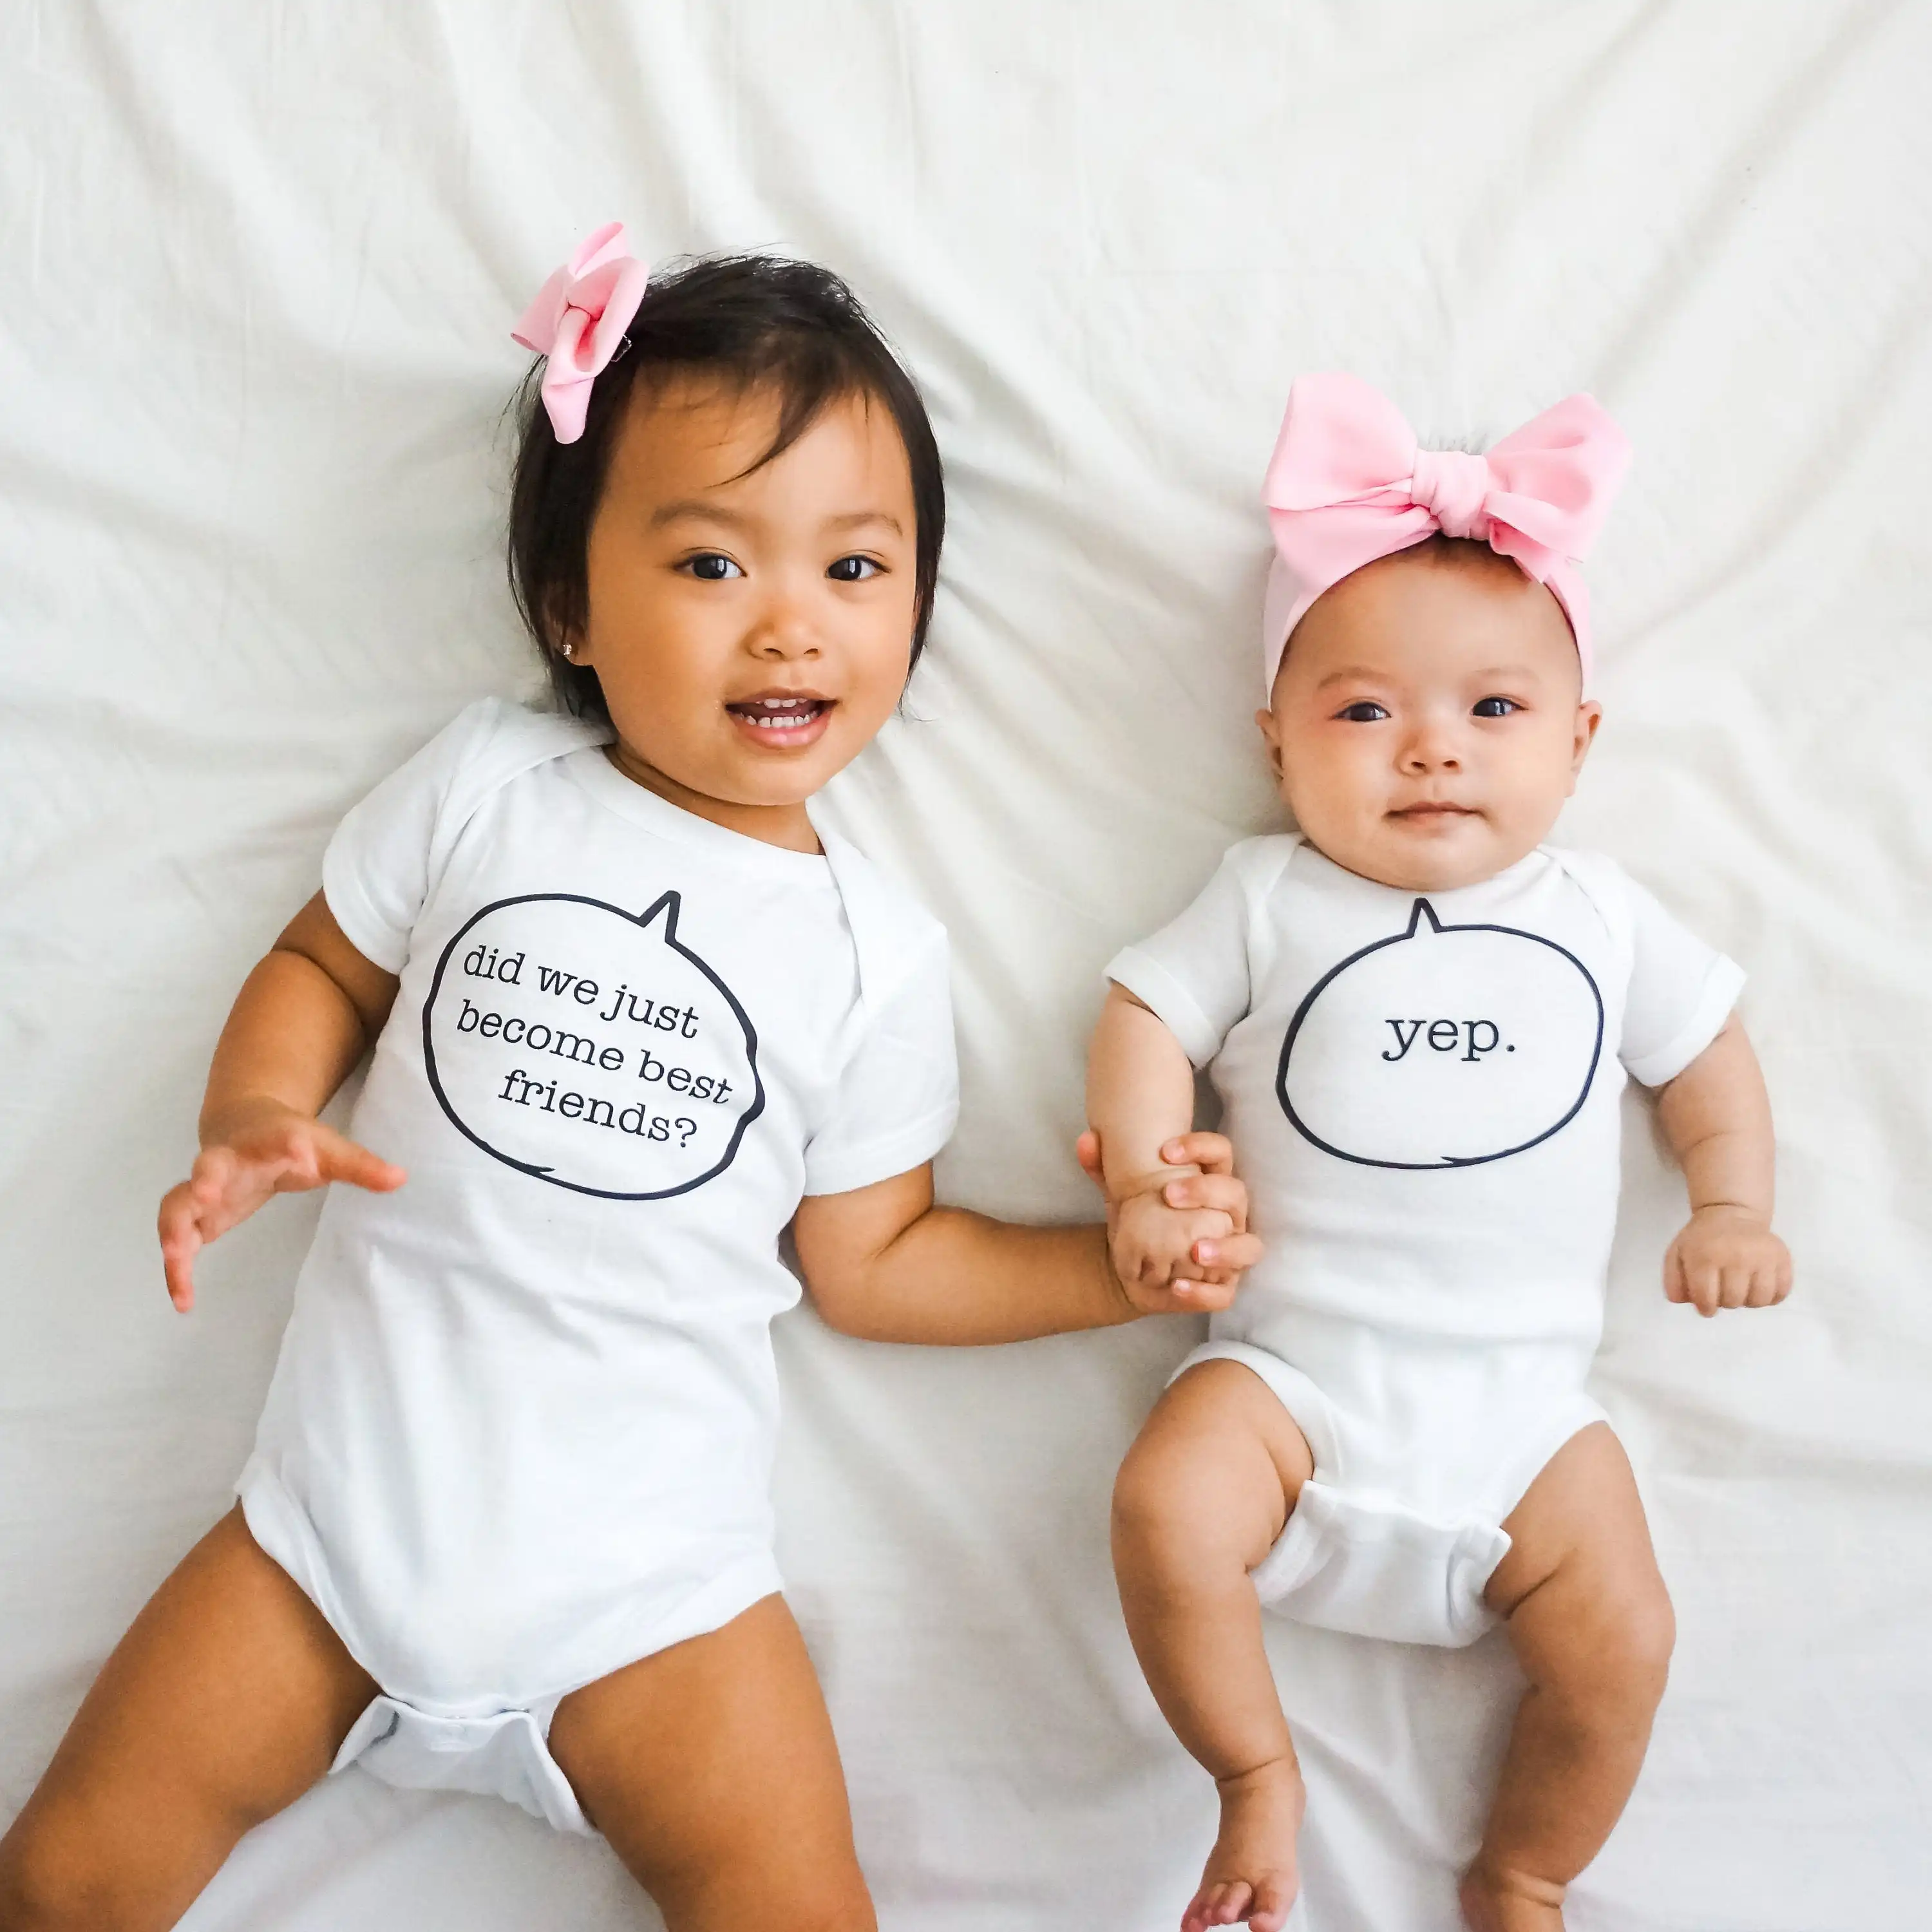 

Did We Just Become Best Friends Sibling Shirts Best Friend Summer Short Sleeve Bodysuits s for Twins Baby Shower Gift